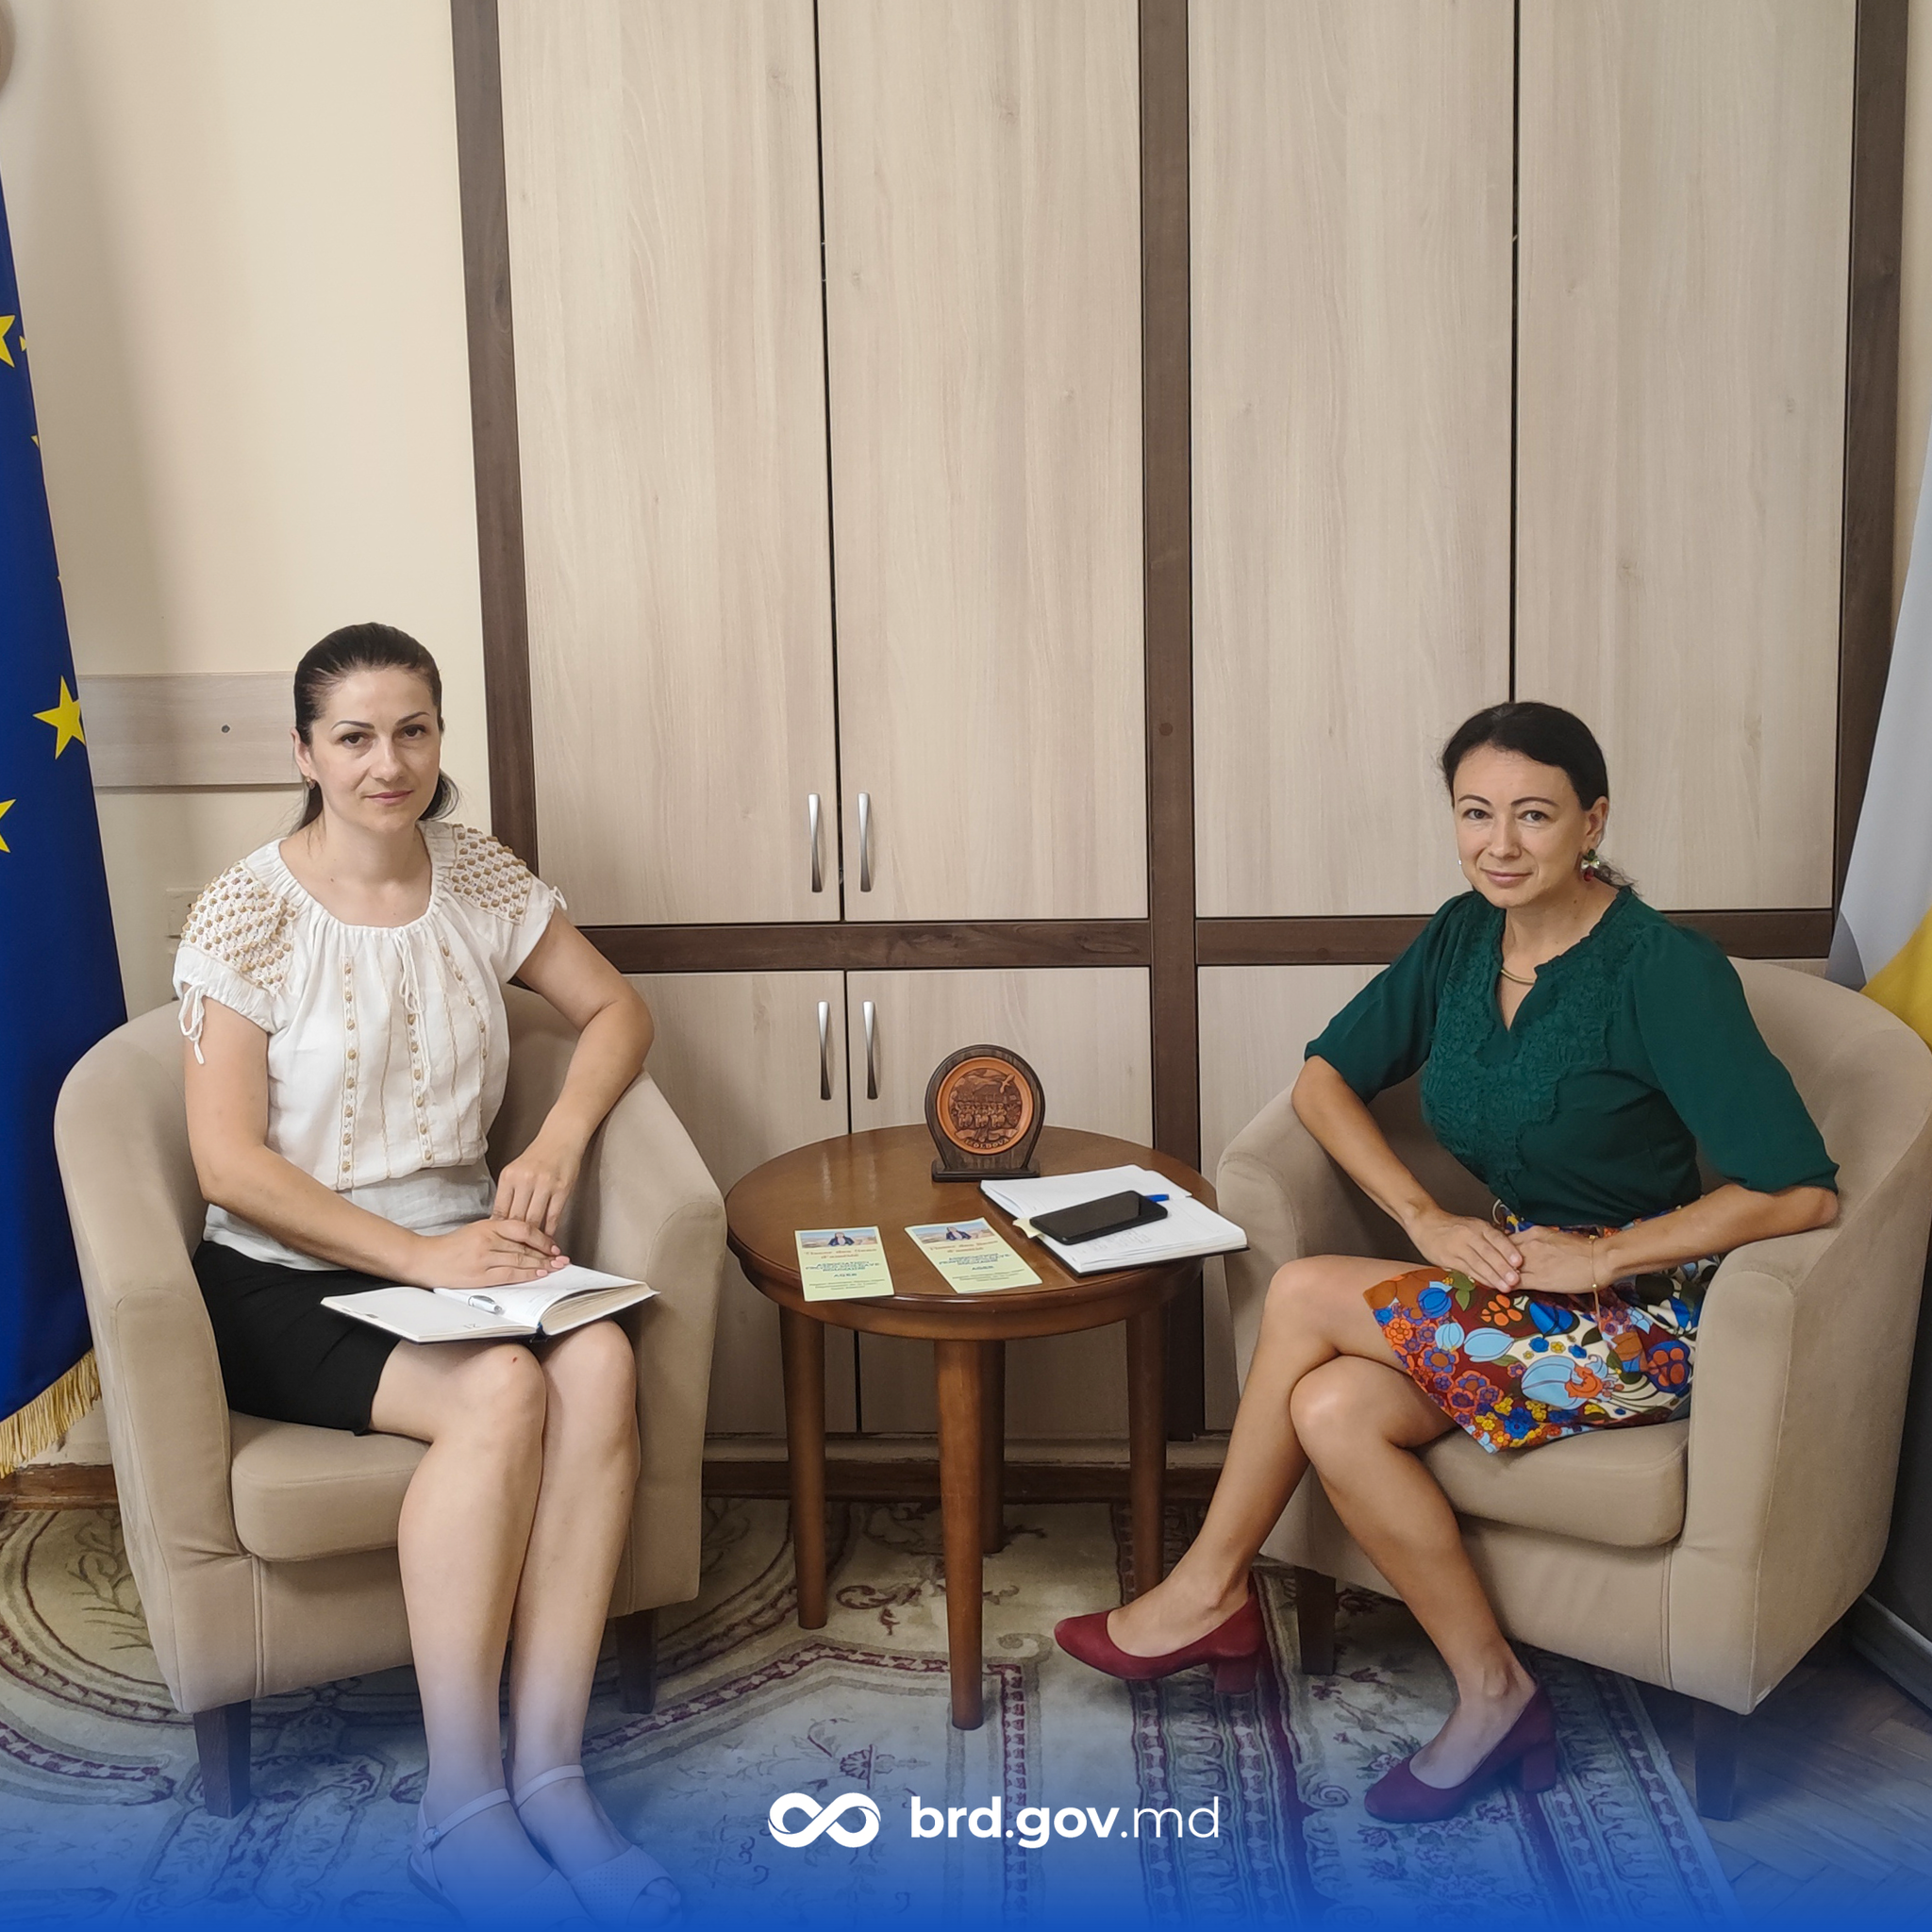 Elena Robu, President of the AGER Association, from France visits the Diaspora Relations Office